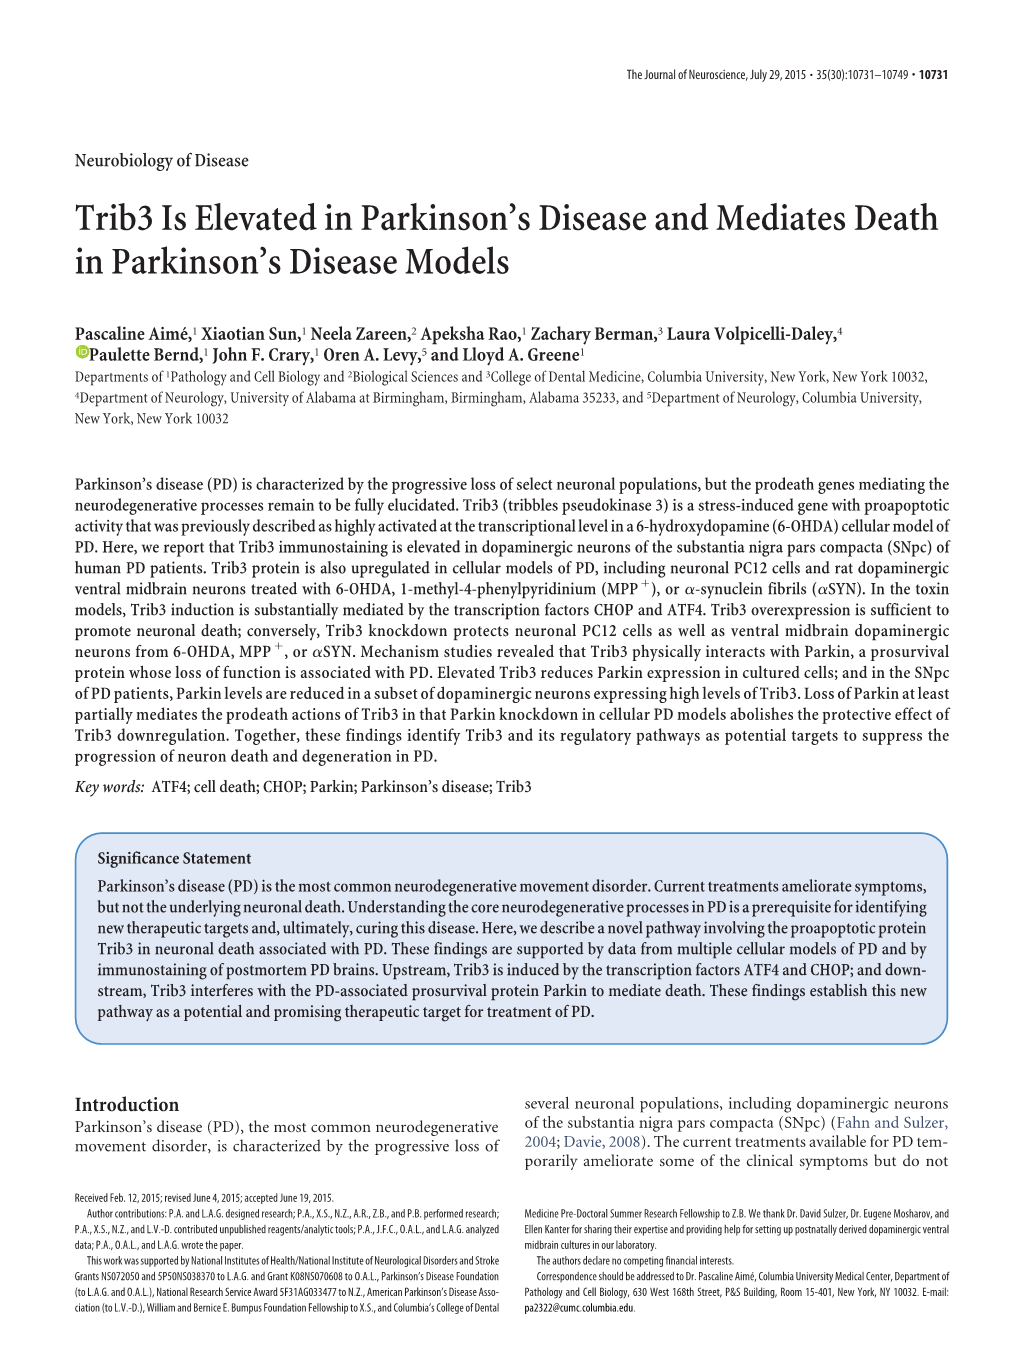 Trib3 Is Elevated in Parkinson's Disease and Mediates Death In